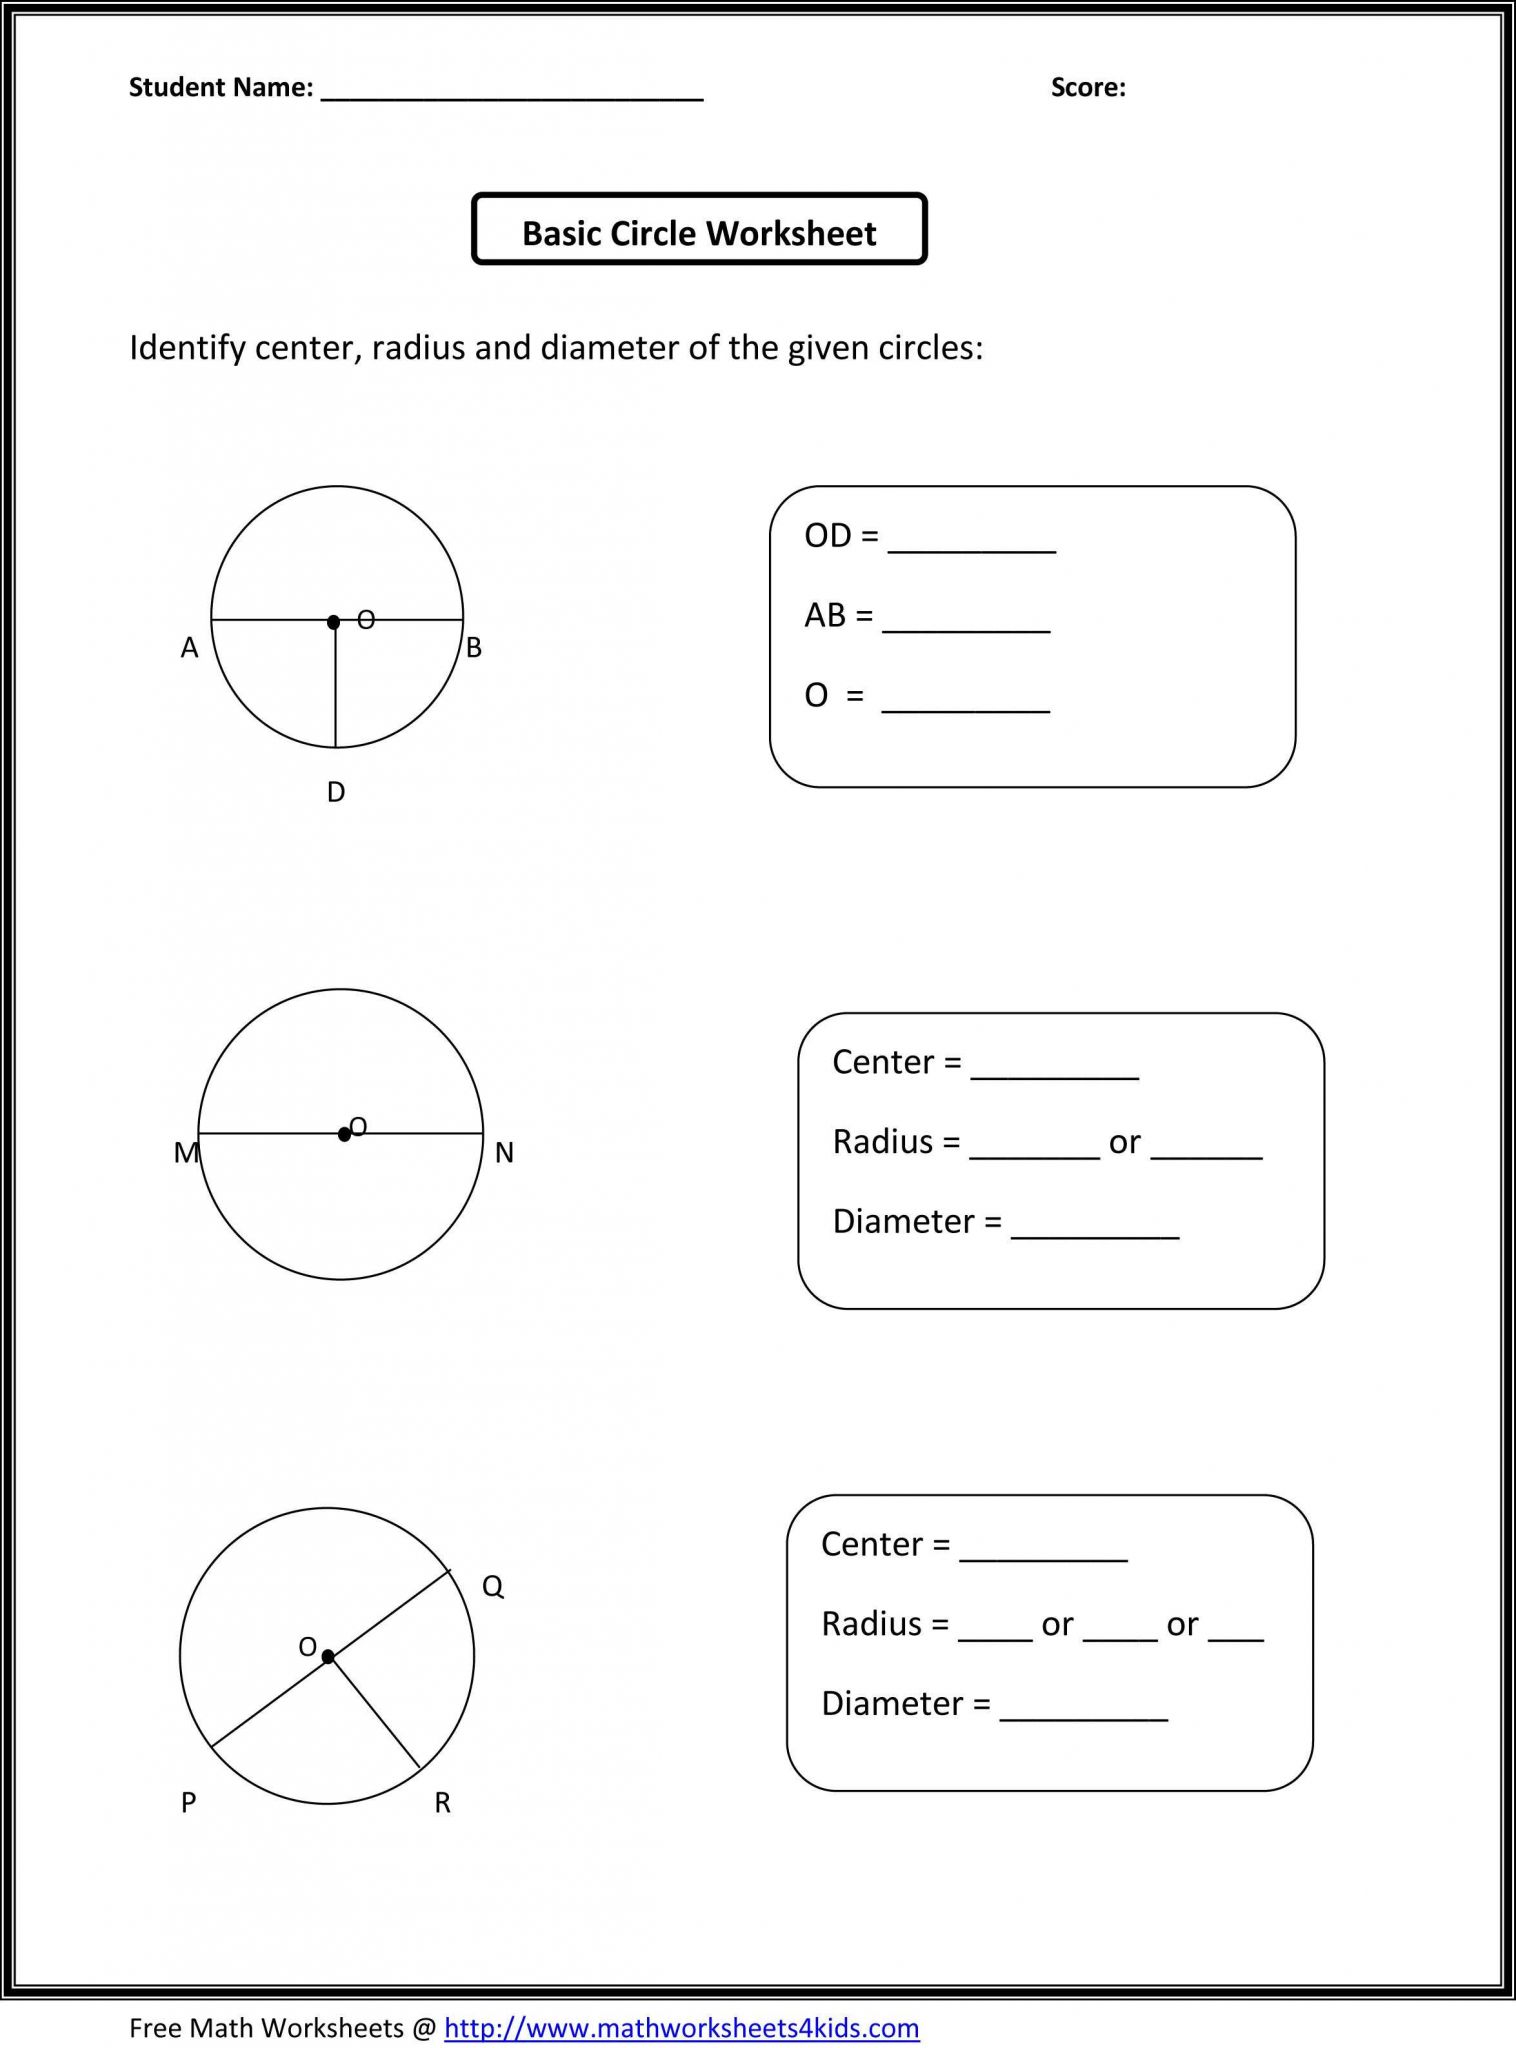 Adding and Subtracting Rational Numbers Worksheet and Adding Three Digits Worksheets Best Adding Doubles Worksheet Home